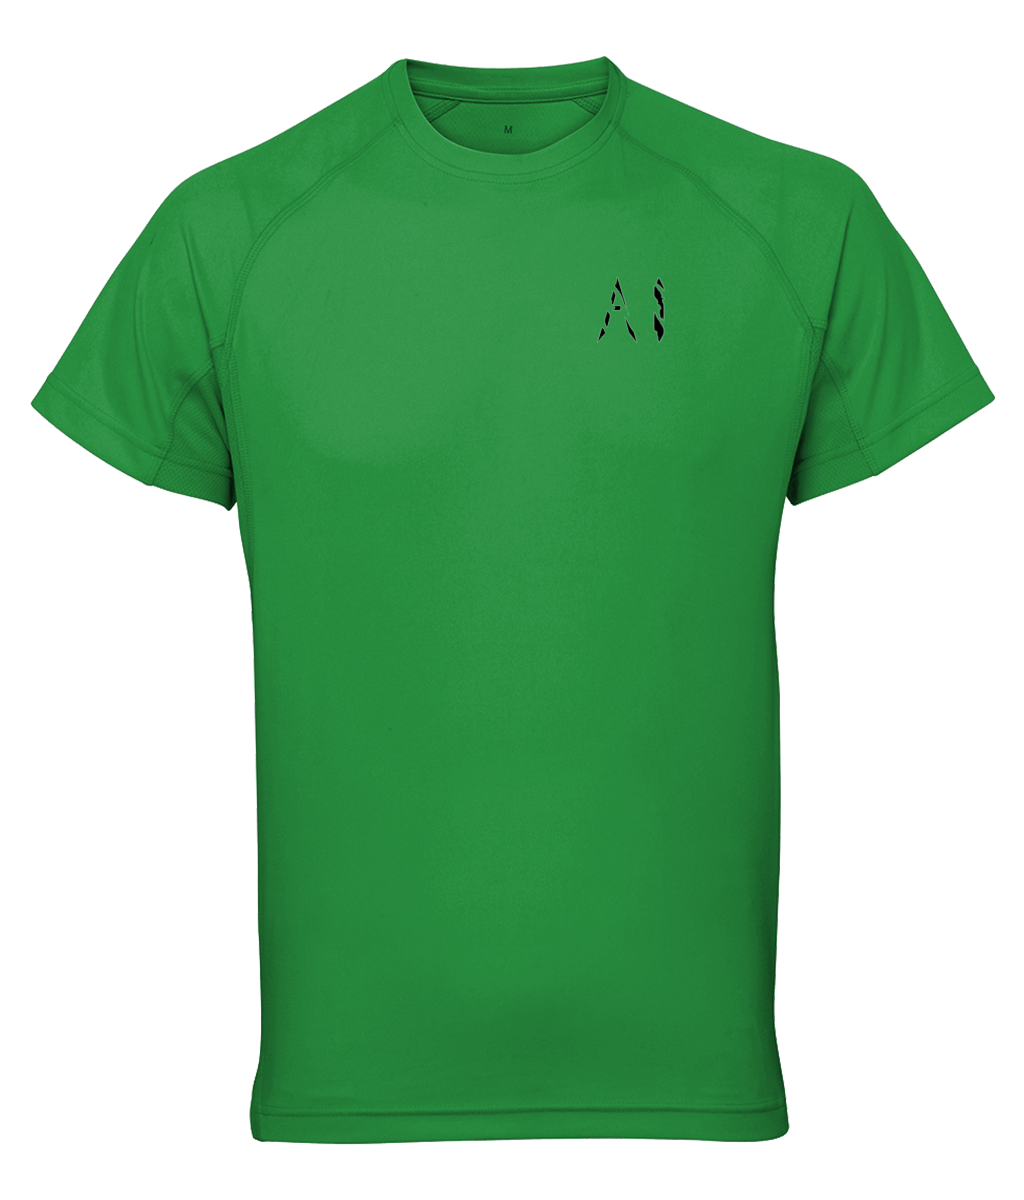 Mens green Athletic Performance Top with black AI logo on the left chest